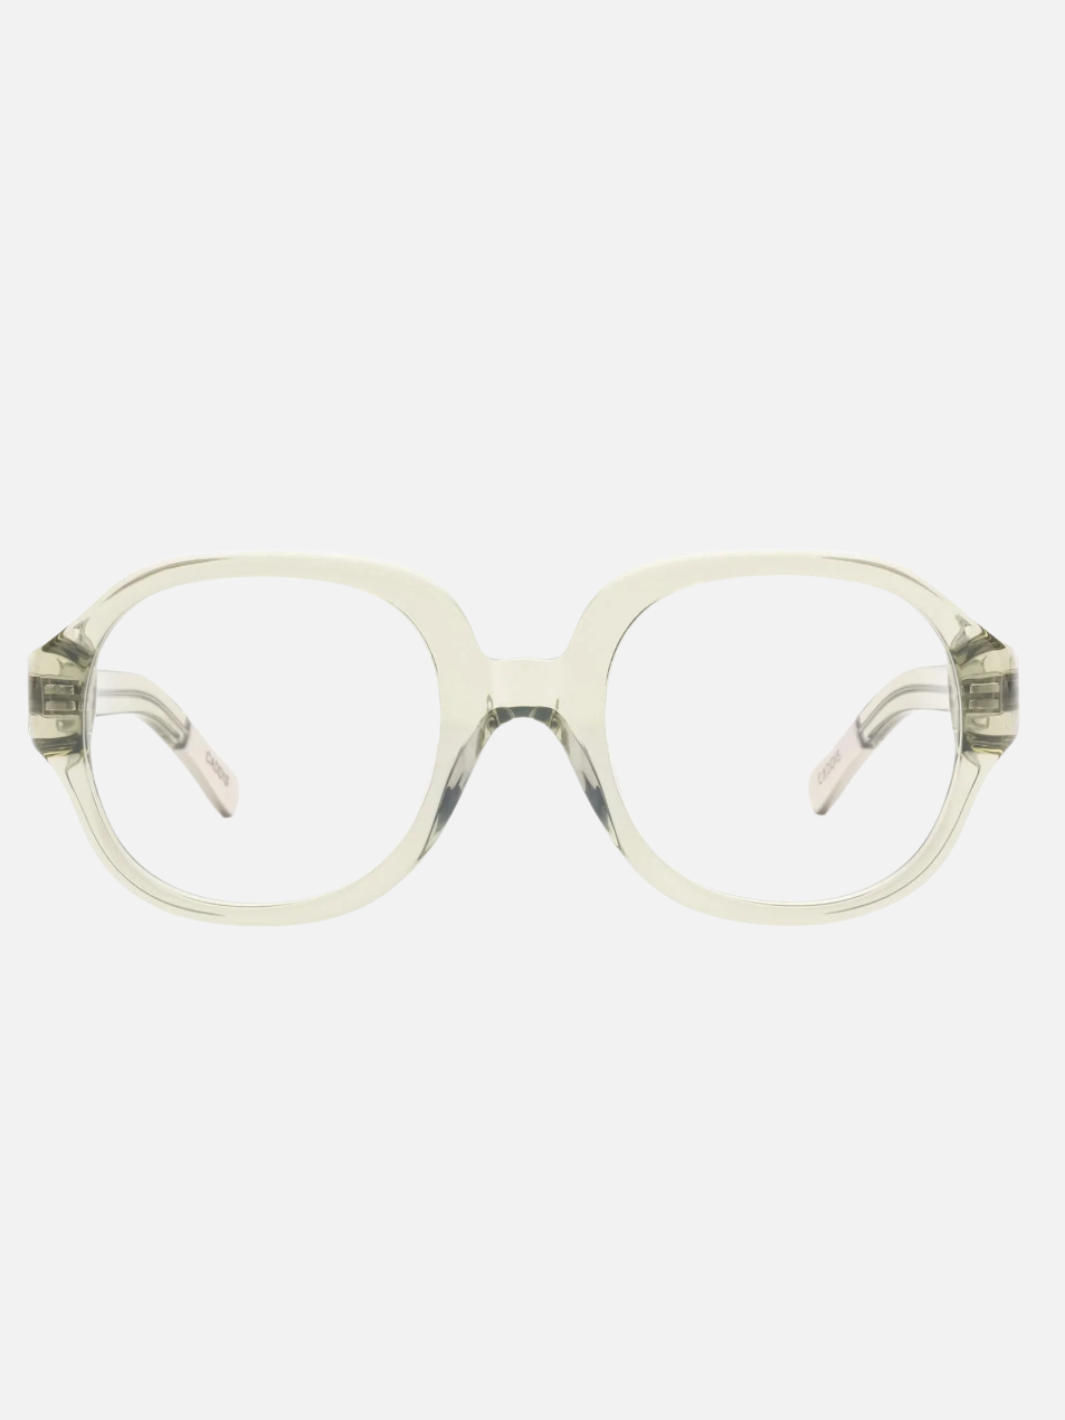 GRAPPELLI READING GLASSES IN SEAWATER - Romi Boutique